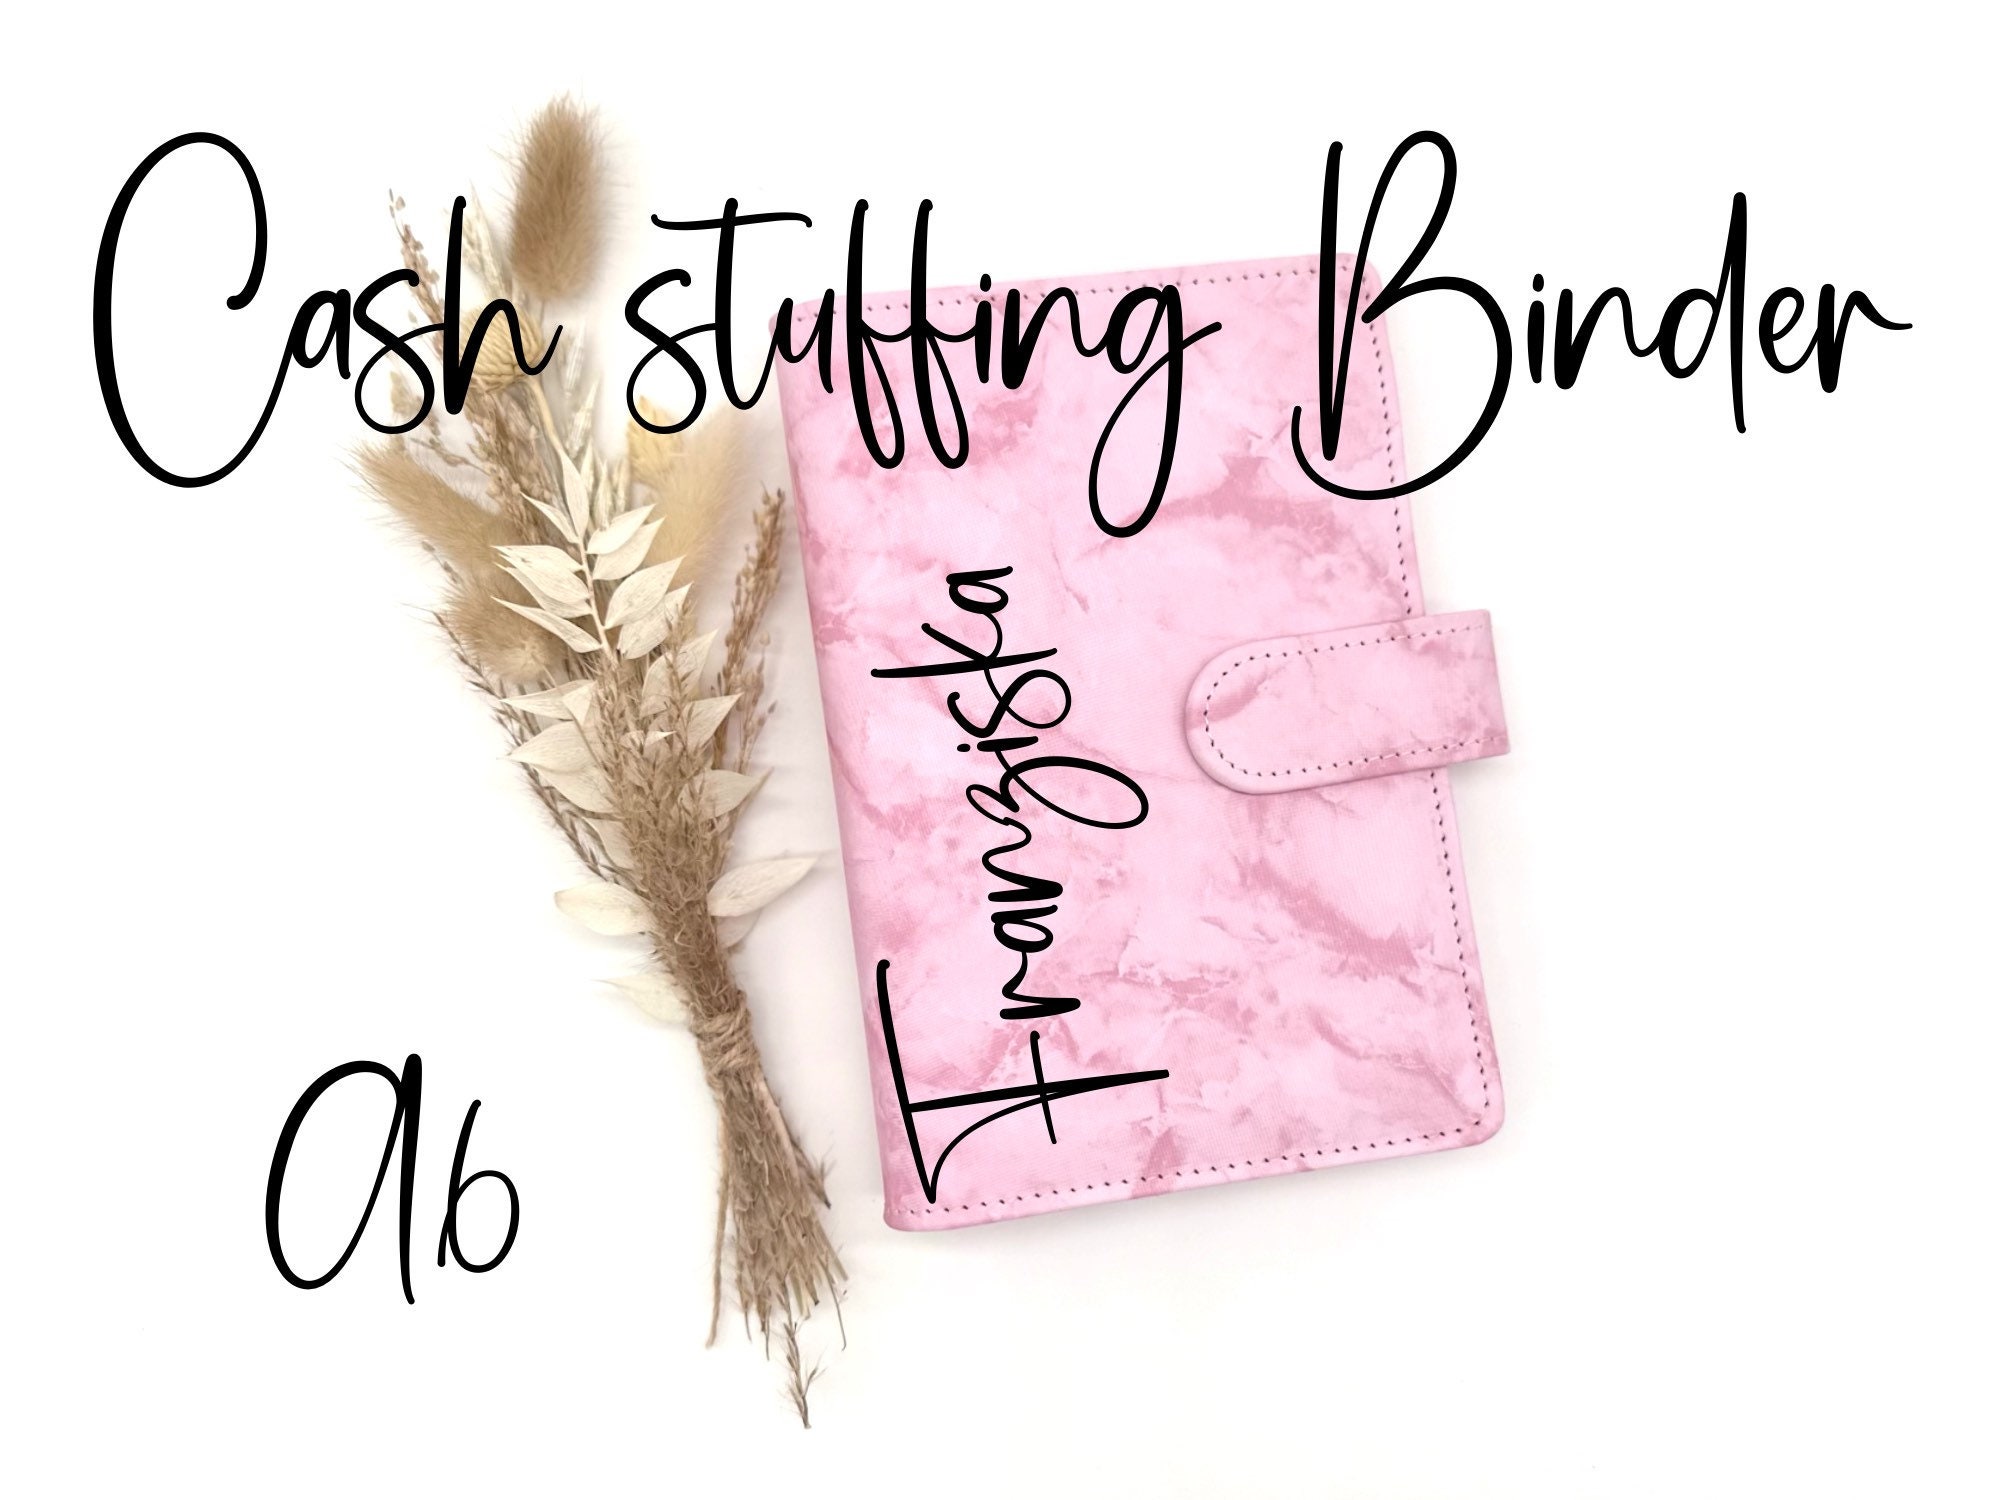 Stay Organized & Save Money: Marble A6 Budget Binder With 8 Cash